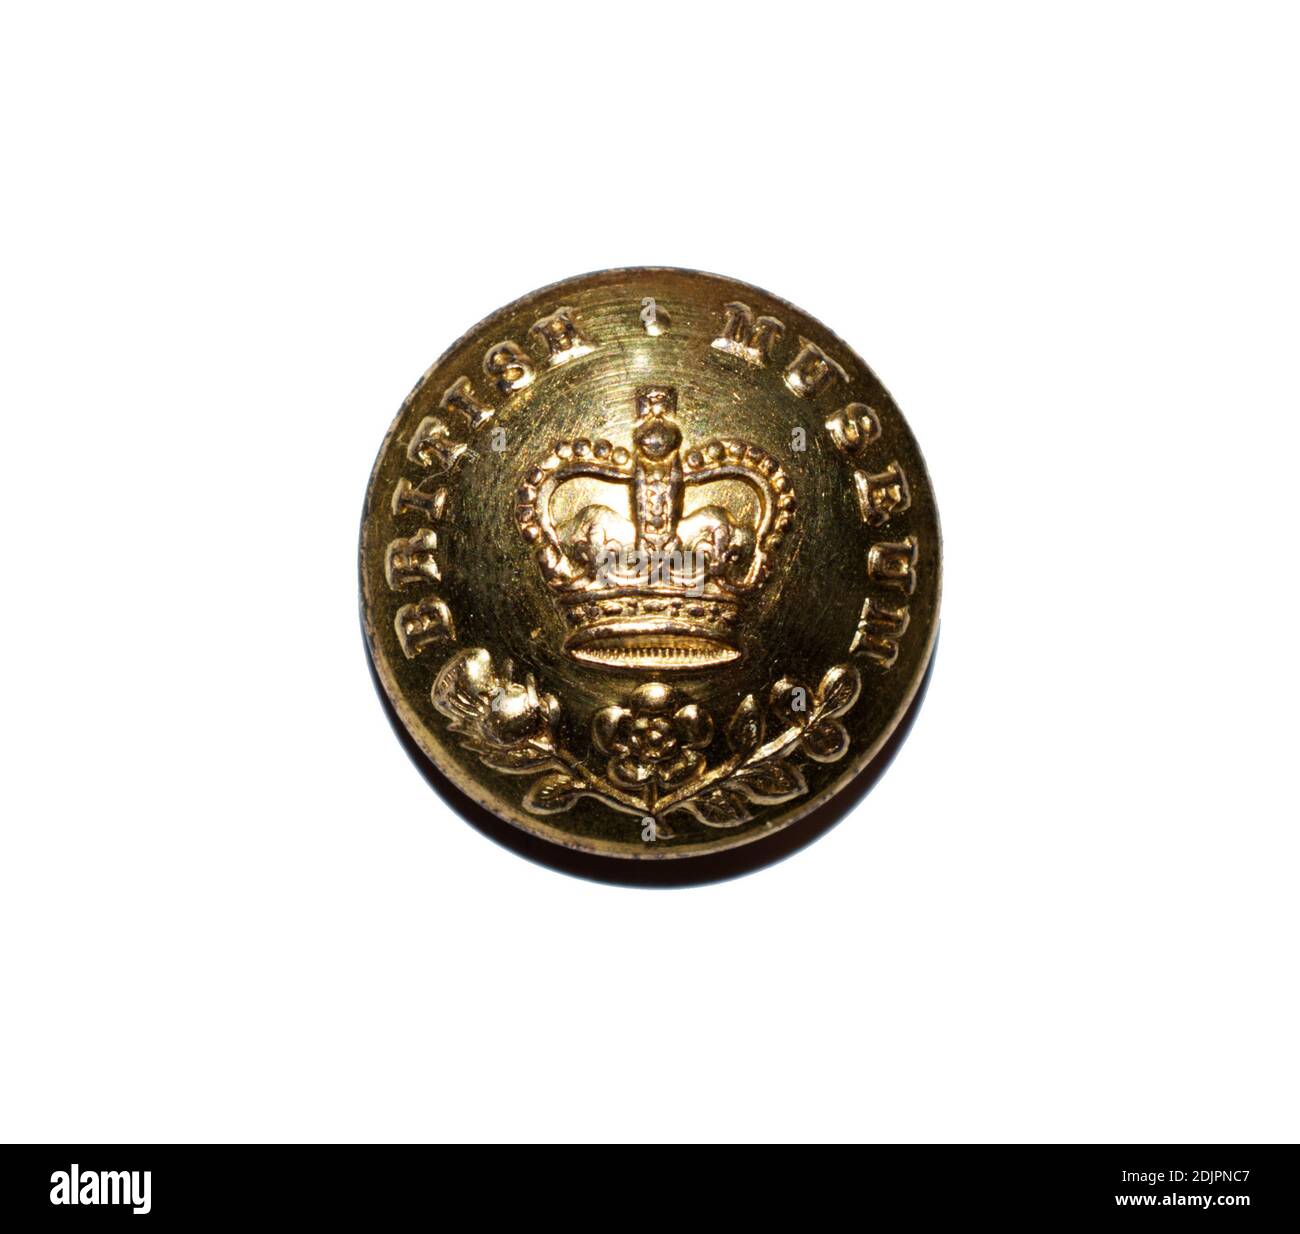 A brass staff uniform button from the British Museum with the Queens crown c. 1980s. Stock Photo